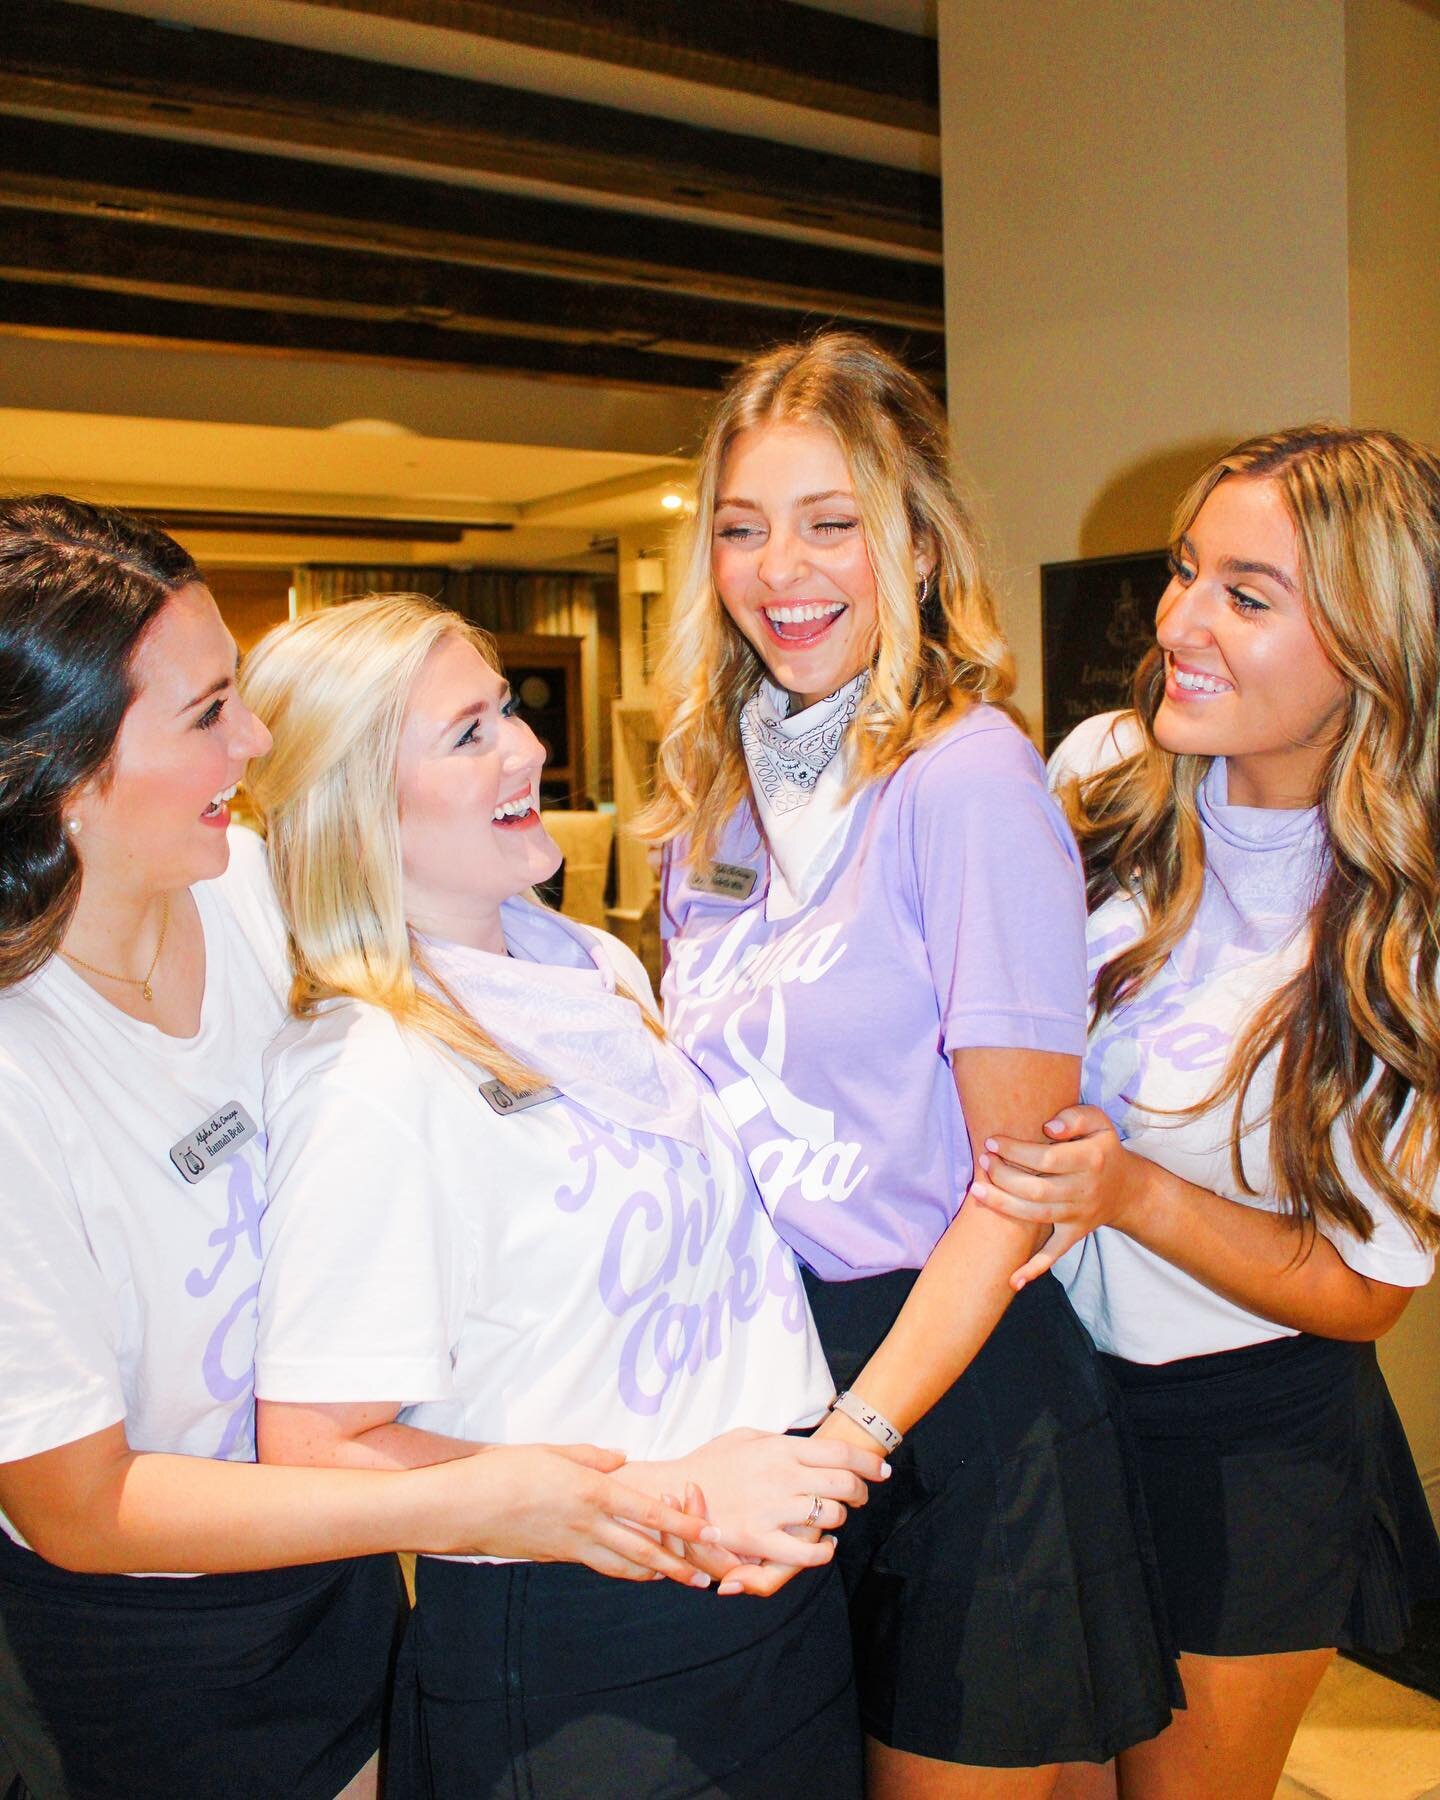 And philanthropy round is almost over! 🥳✨
Our chapters have had the best time sharing their philanthropies with you all. The countdown to sisterhood round is on!!